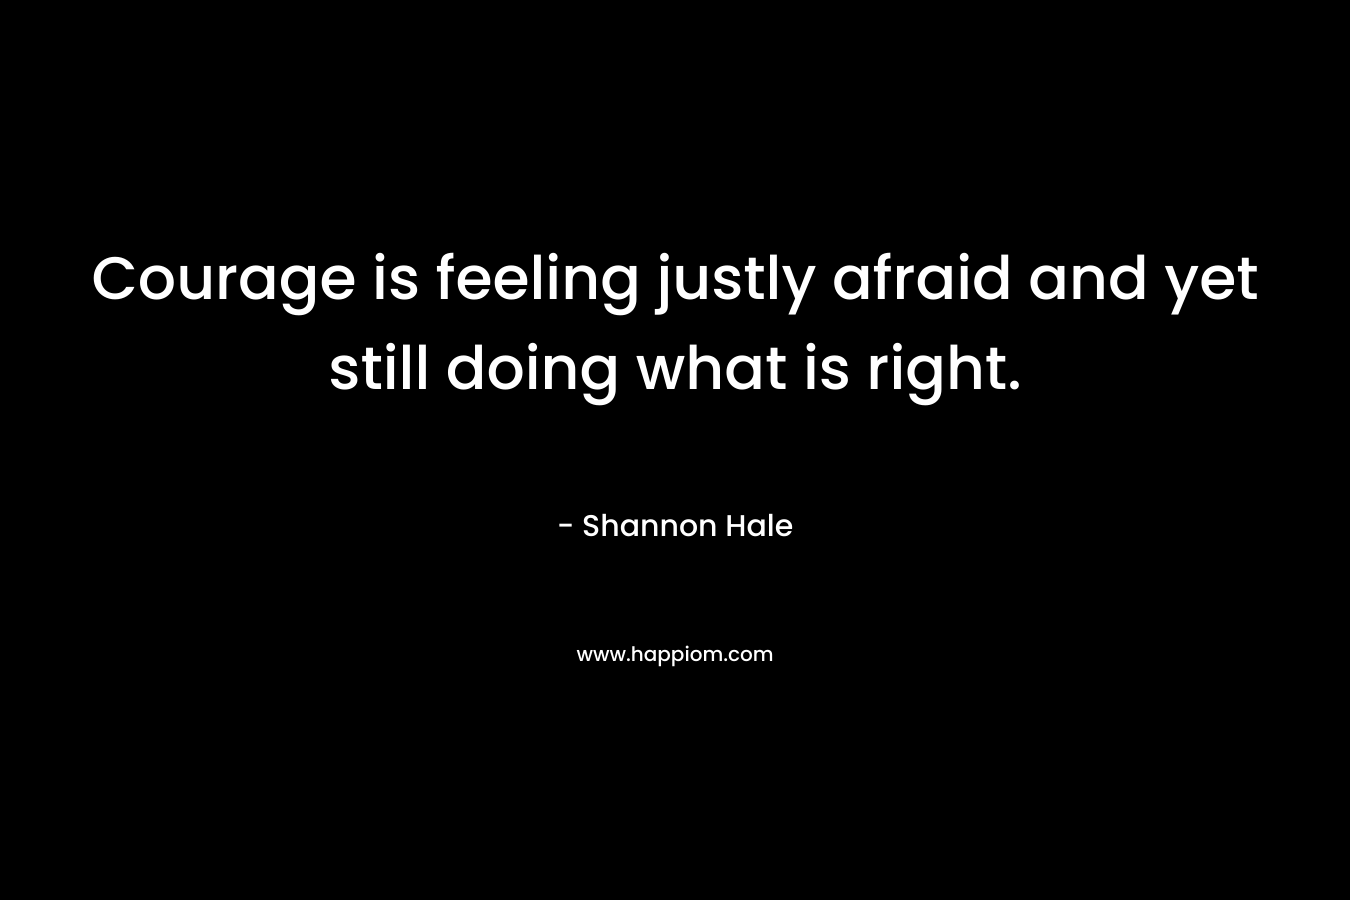 Courage is feeling justly afraid and yet still doing what is right.